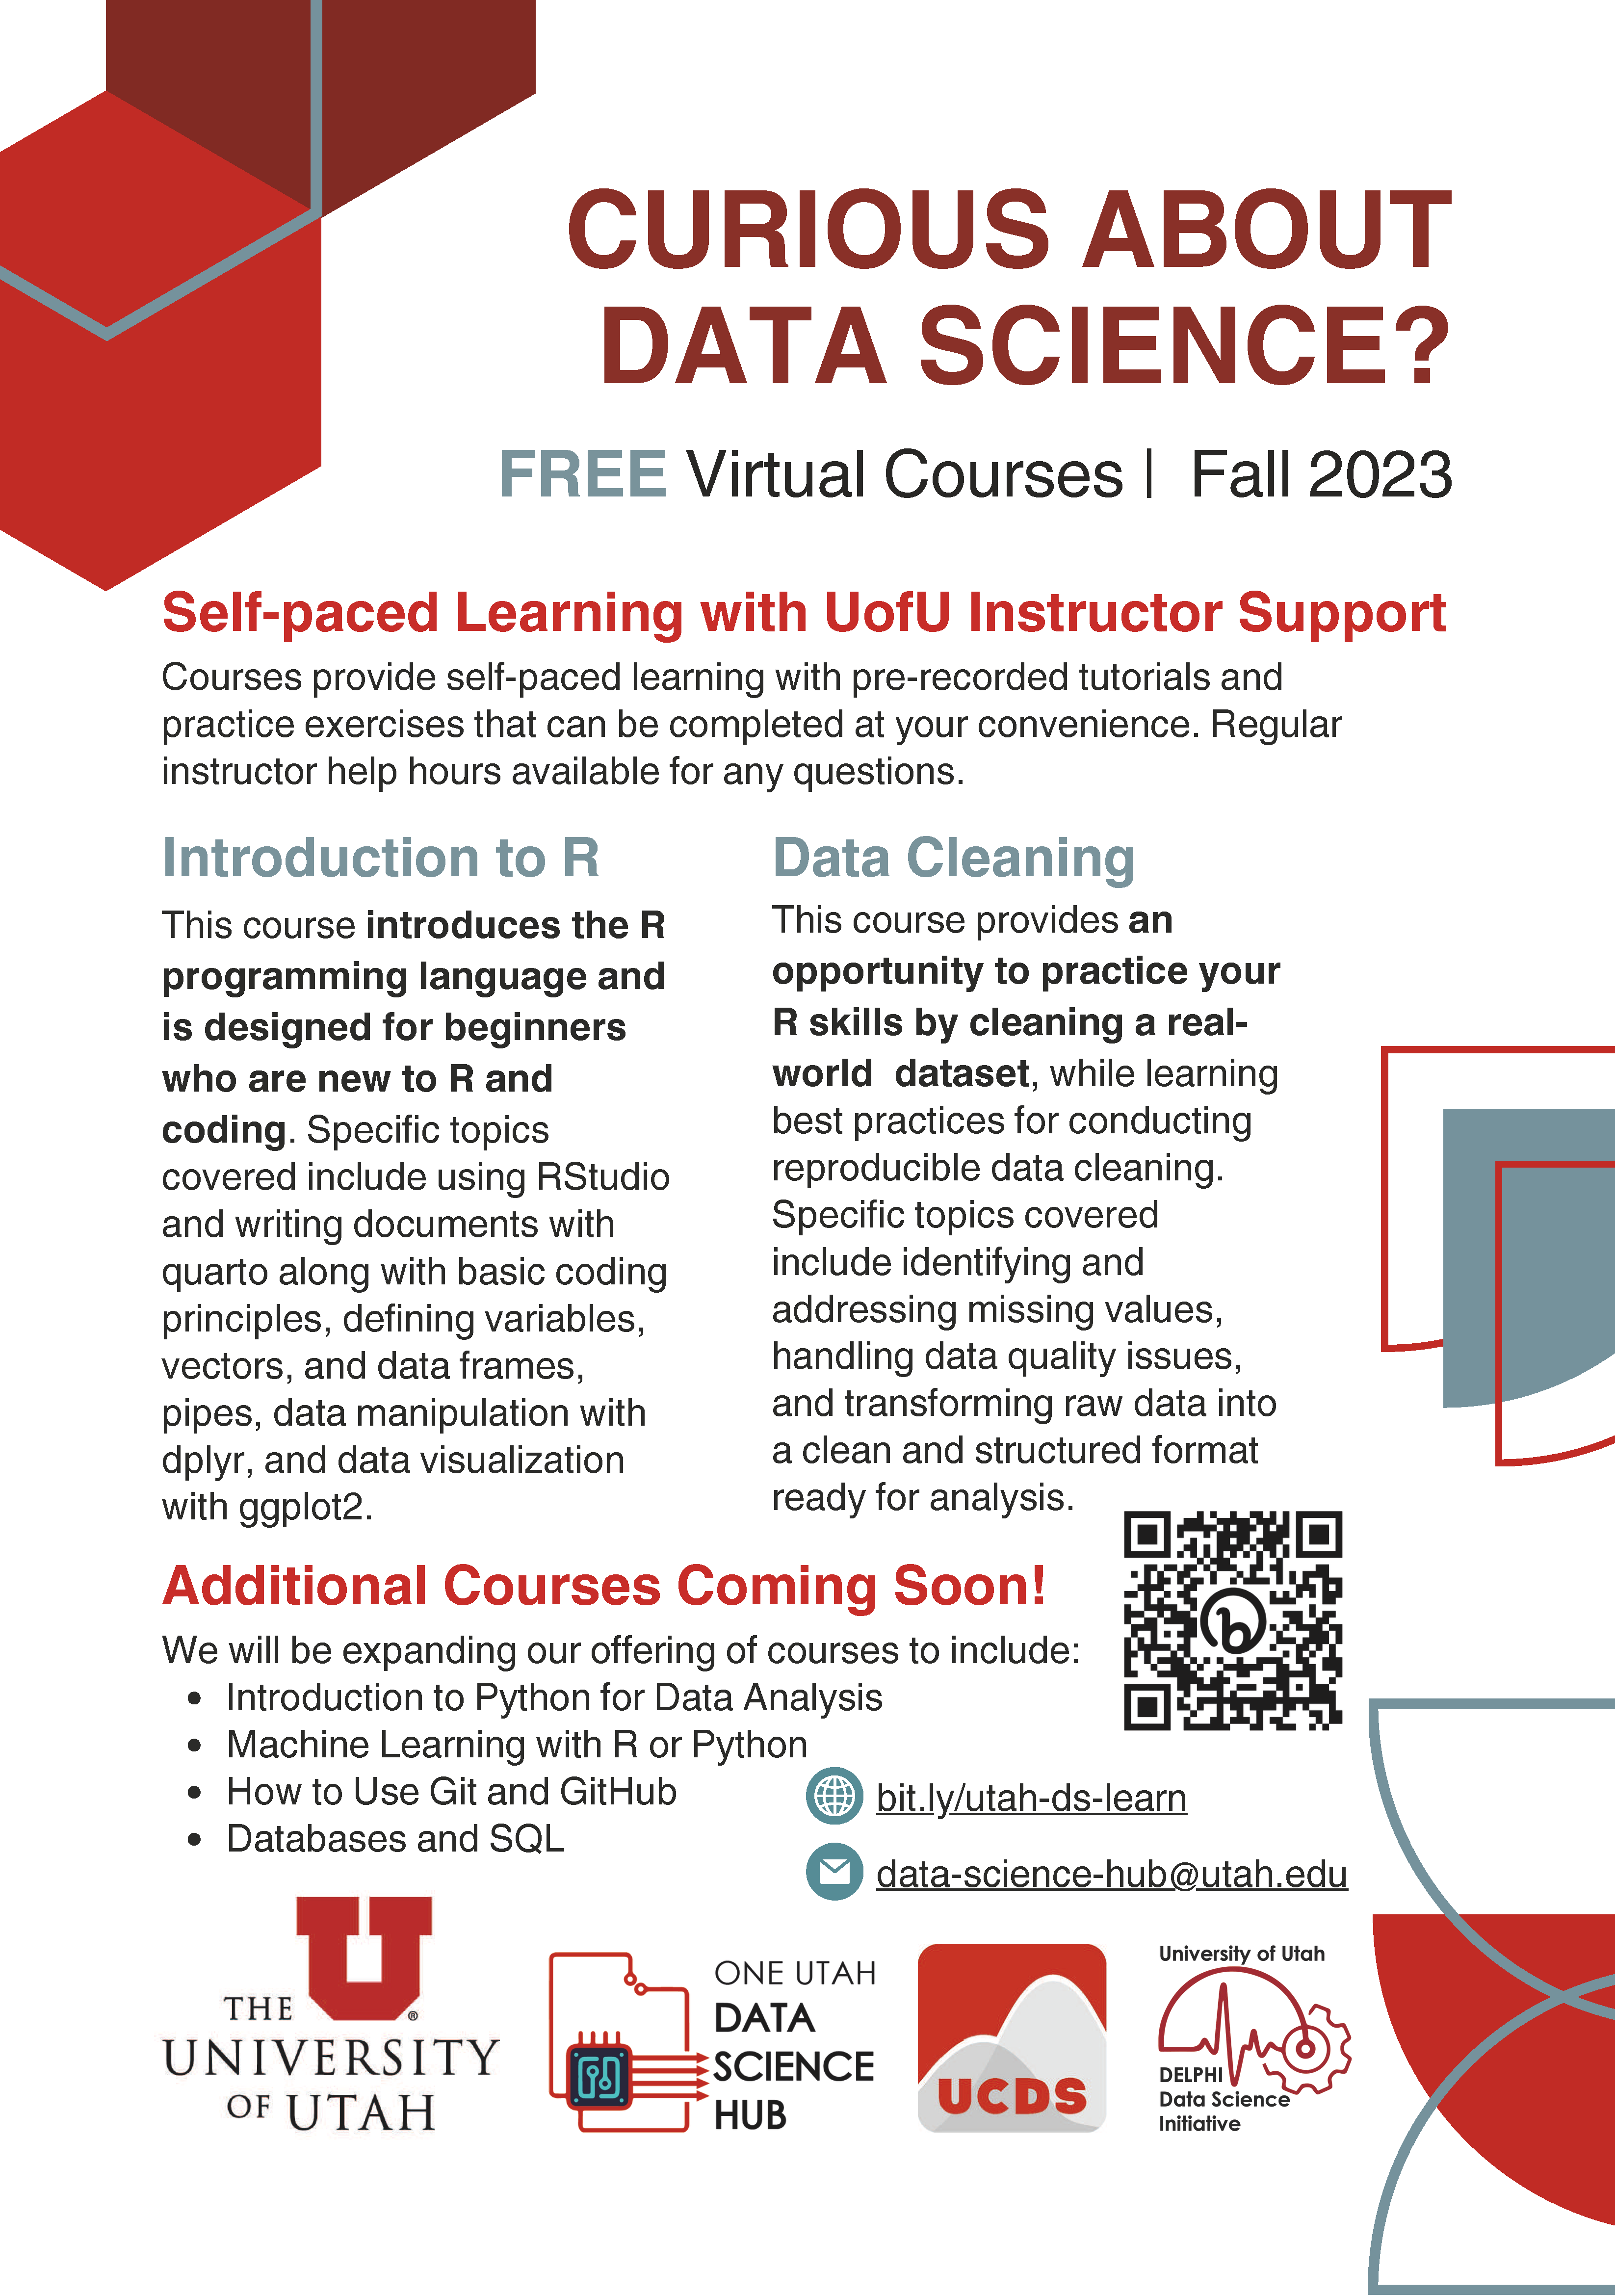 Data Science Learning Opportunities